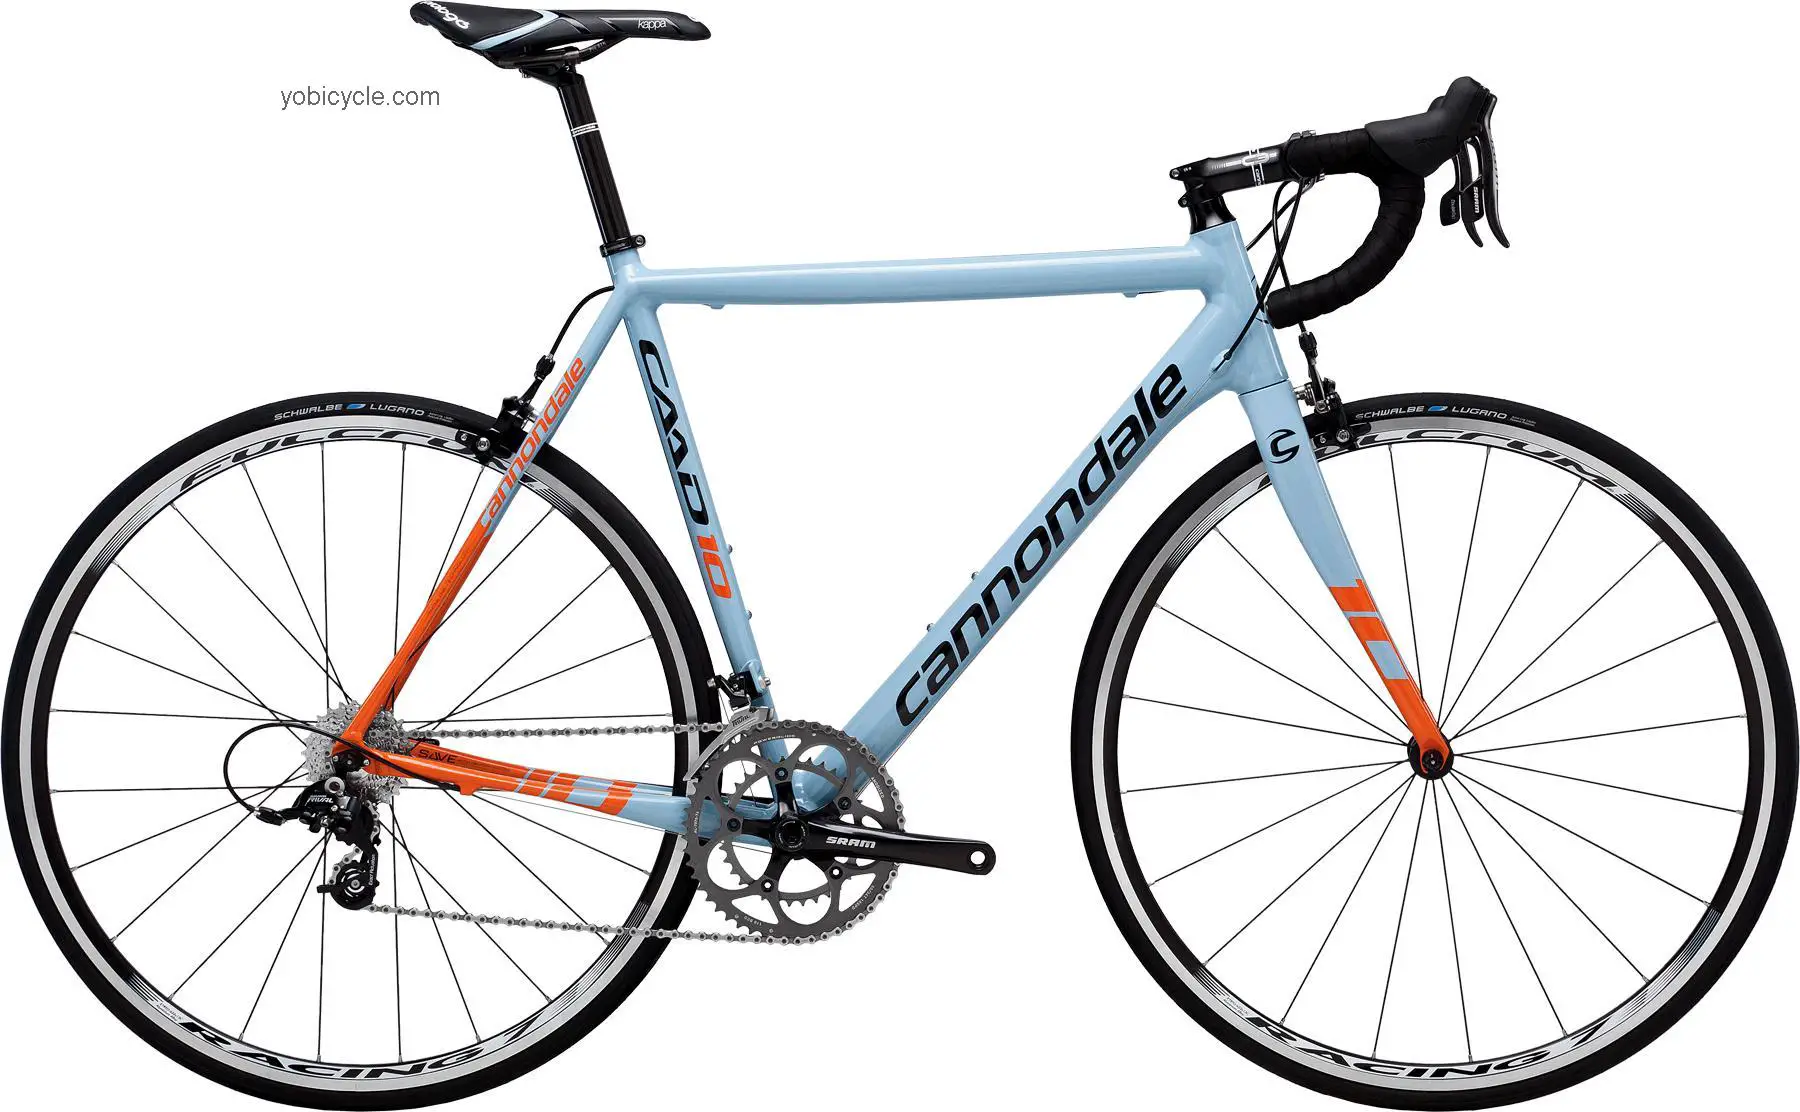 Cannondale CAAD10 4 Rival 2012 comparison online with competitors